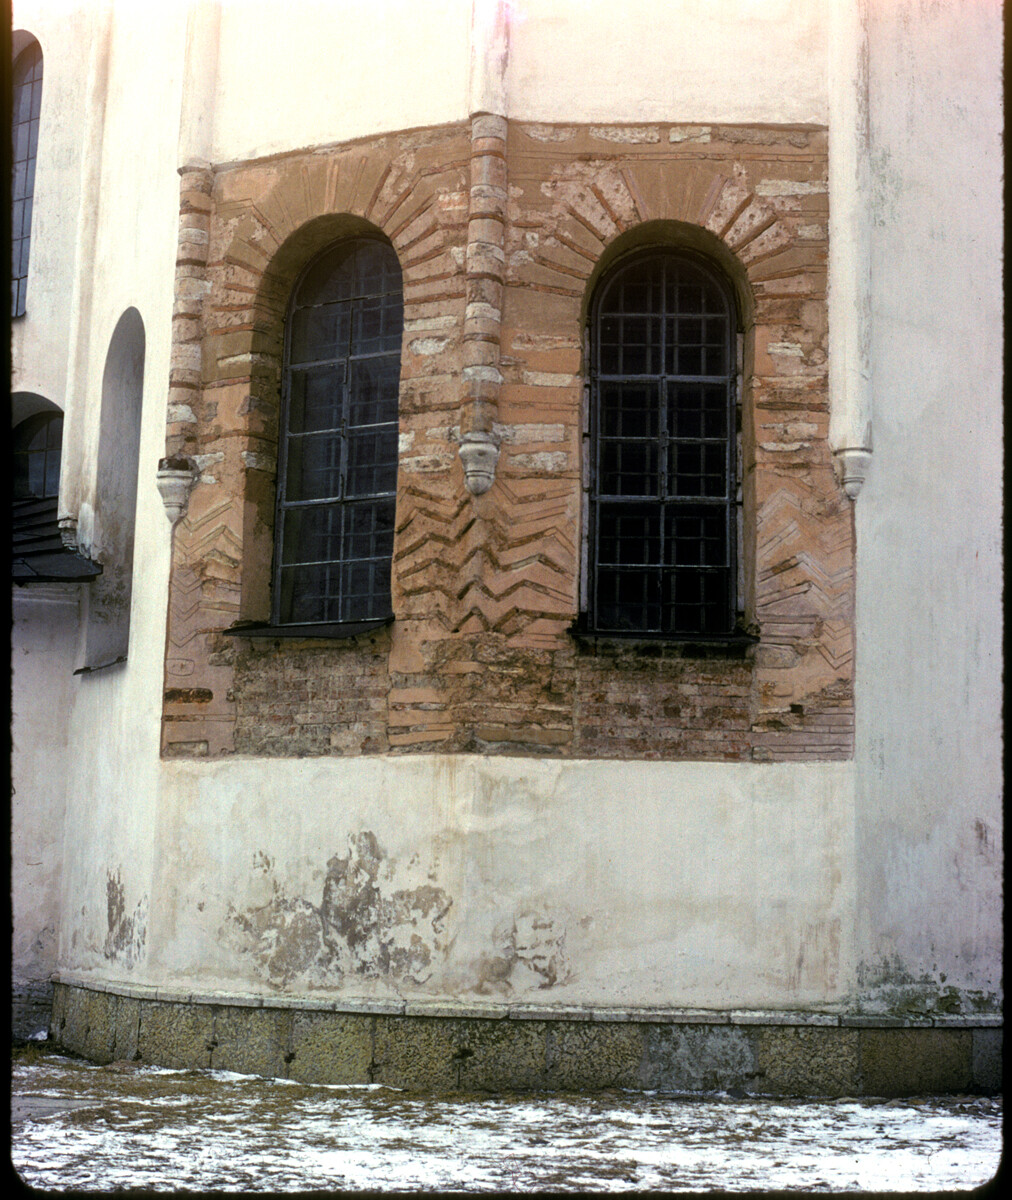 Cathedral of St. Sophia, east facade. Apse with detail of original plinthos brickwork beneath stucco. March 27, 1991